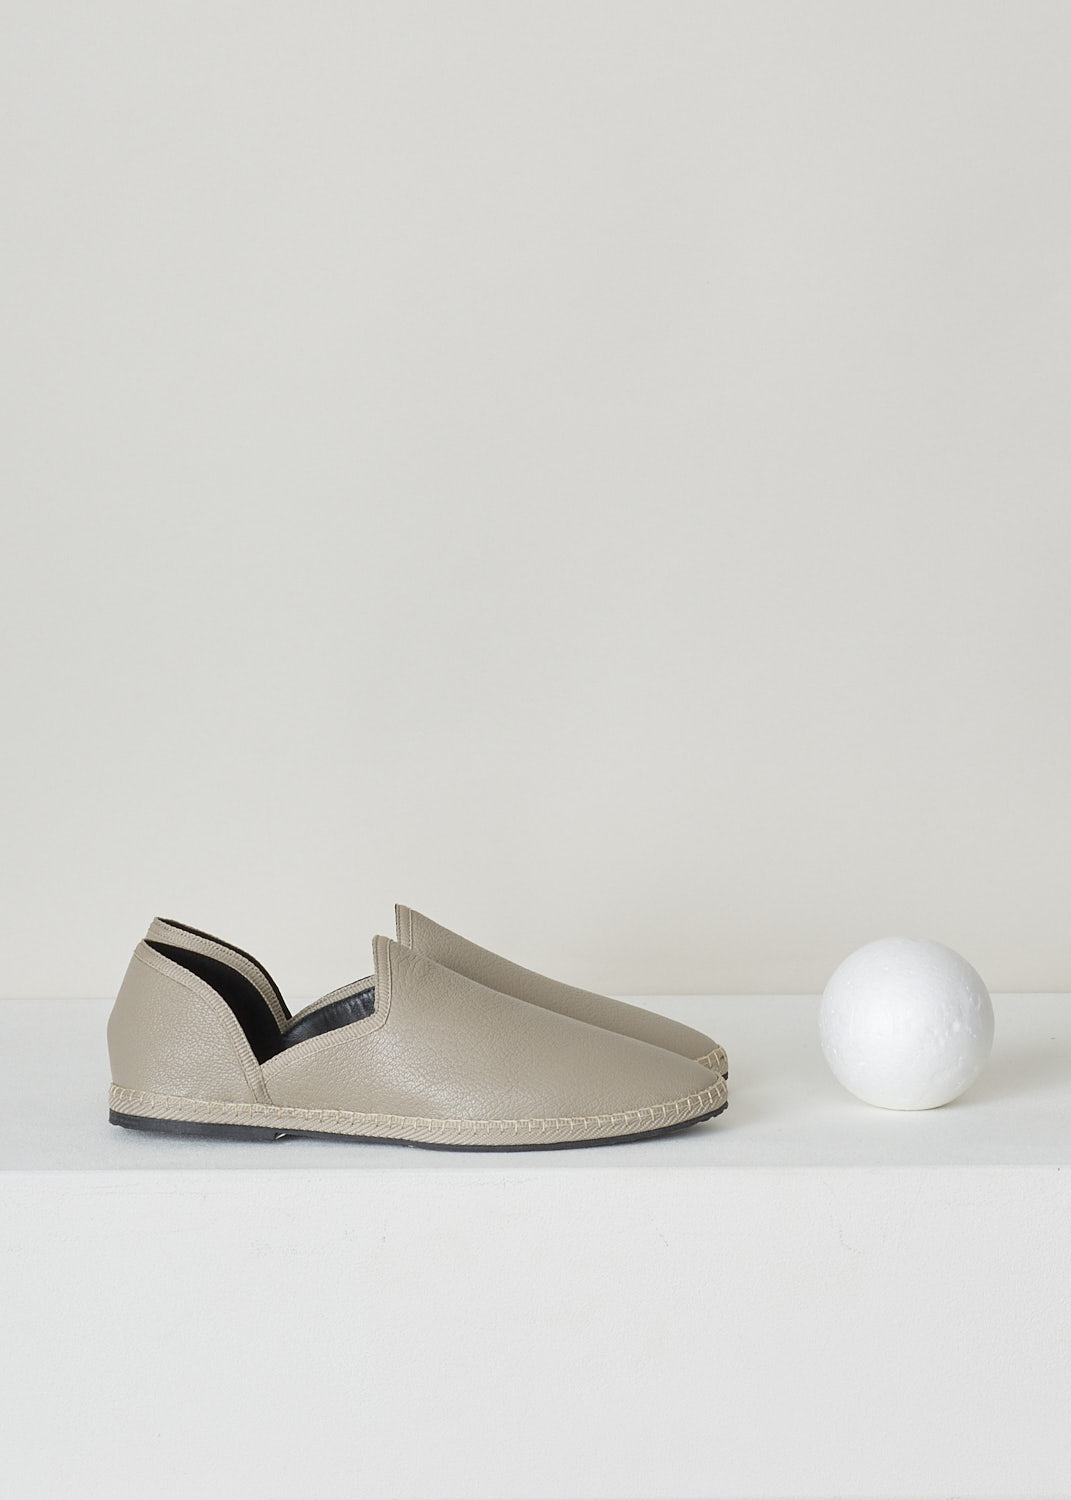 THE ROW, GREY GRAINED LEATHER SLIPPERS, FRIULANE_SLIPPER_NUAGE_F1146A_L36_NUA, Grey, Side, Minimalistic grey colored grain leather slipper. The slip-in model features a rounded toe vamp. 
